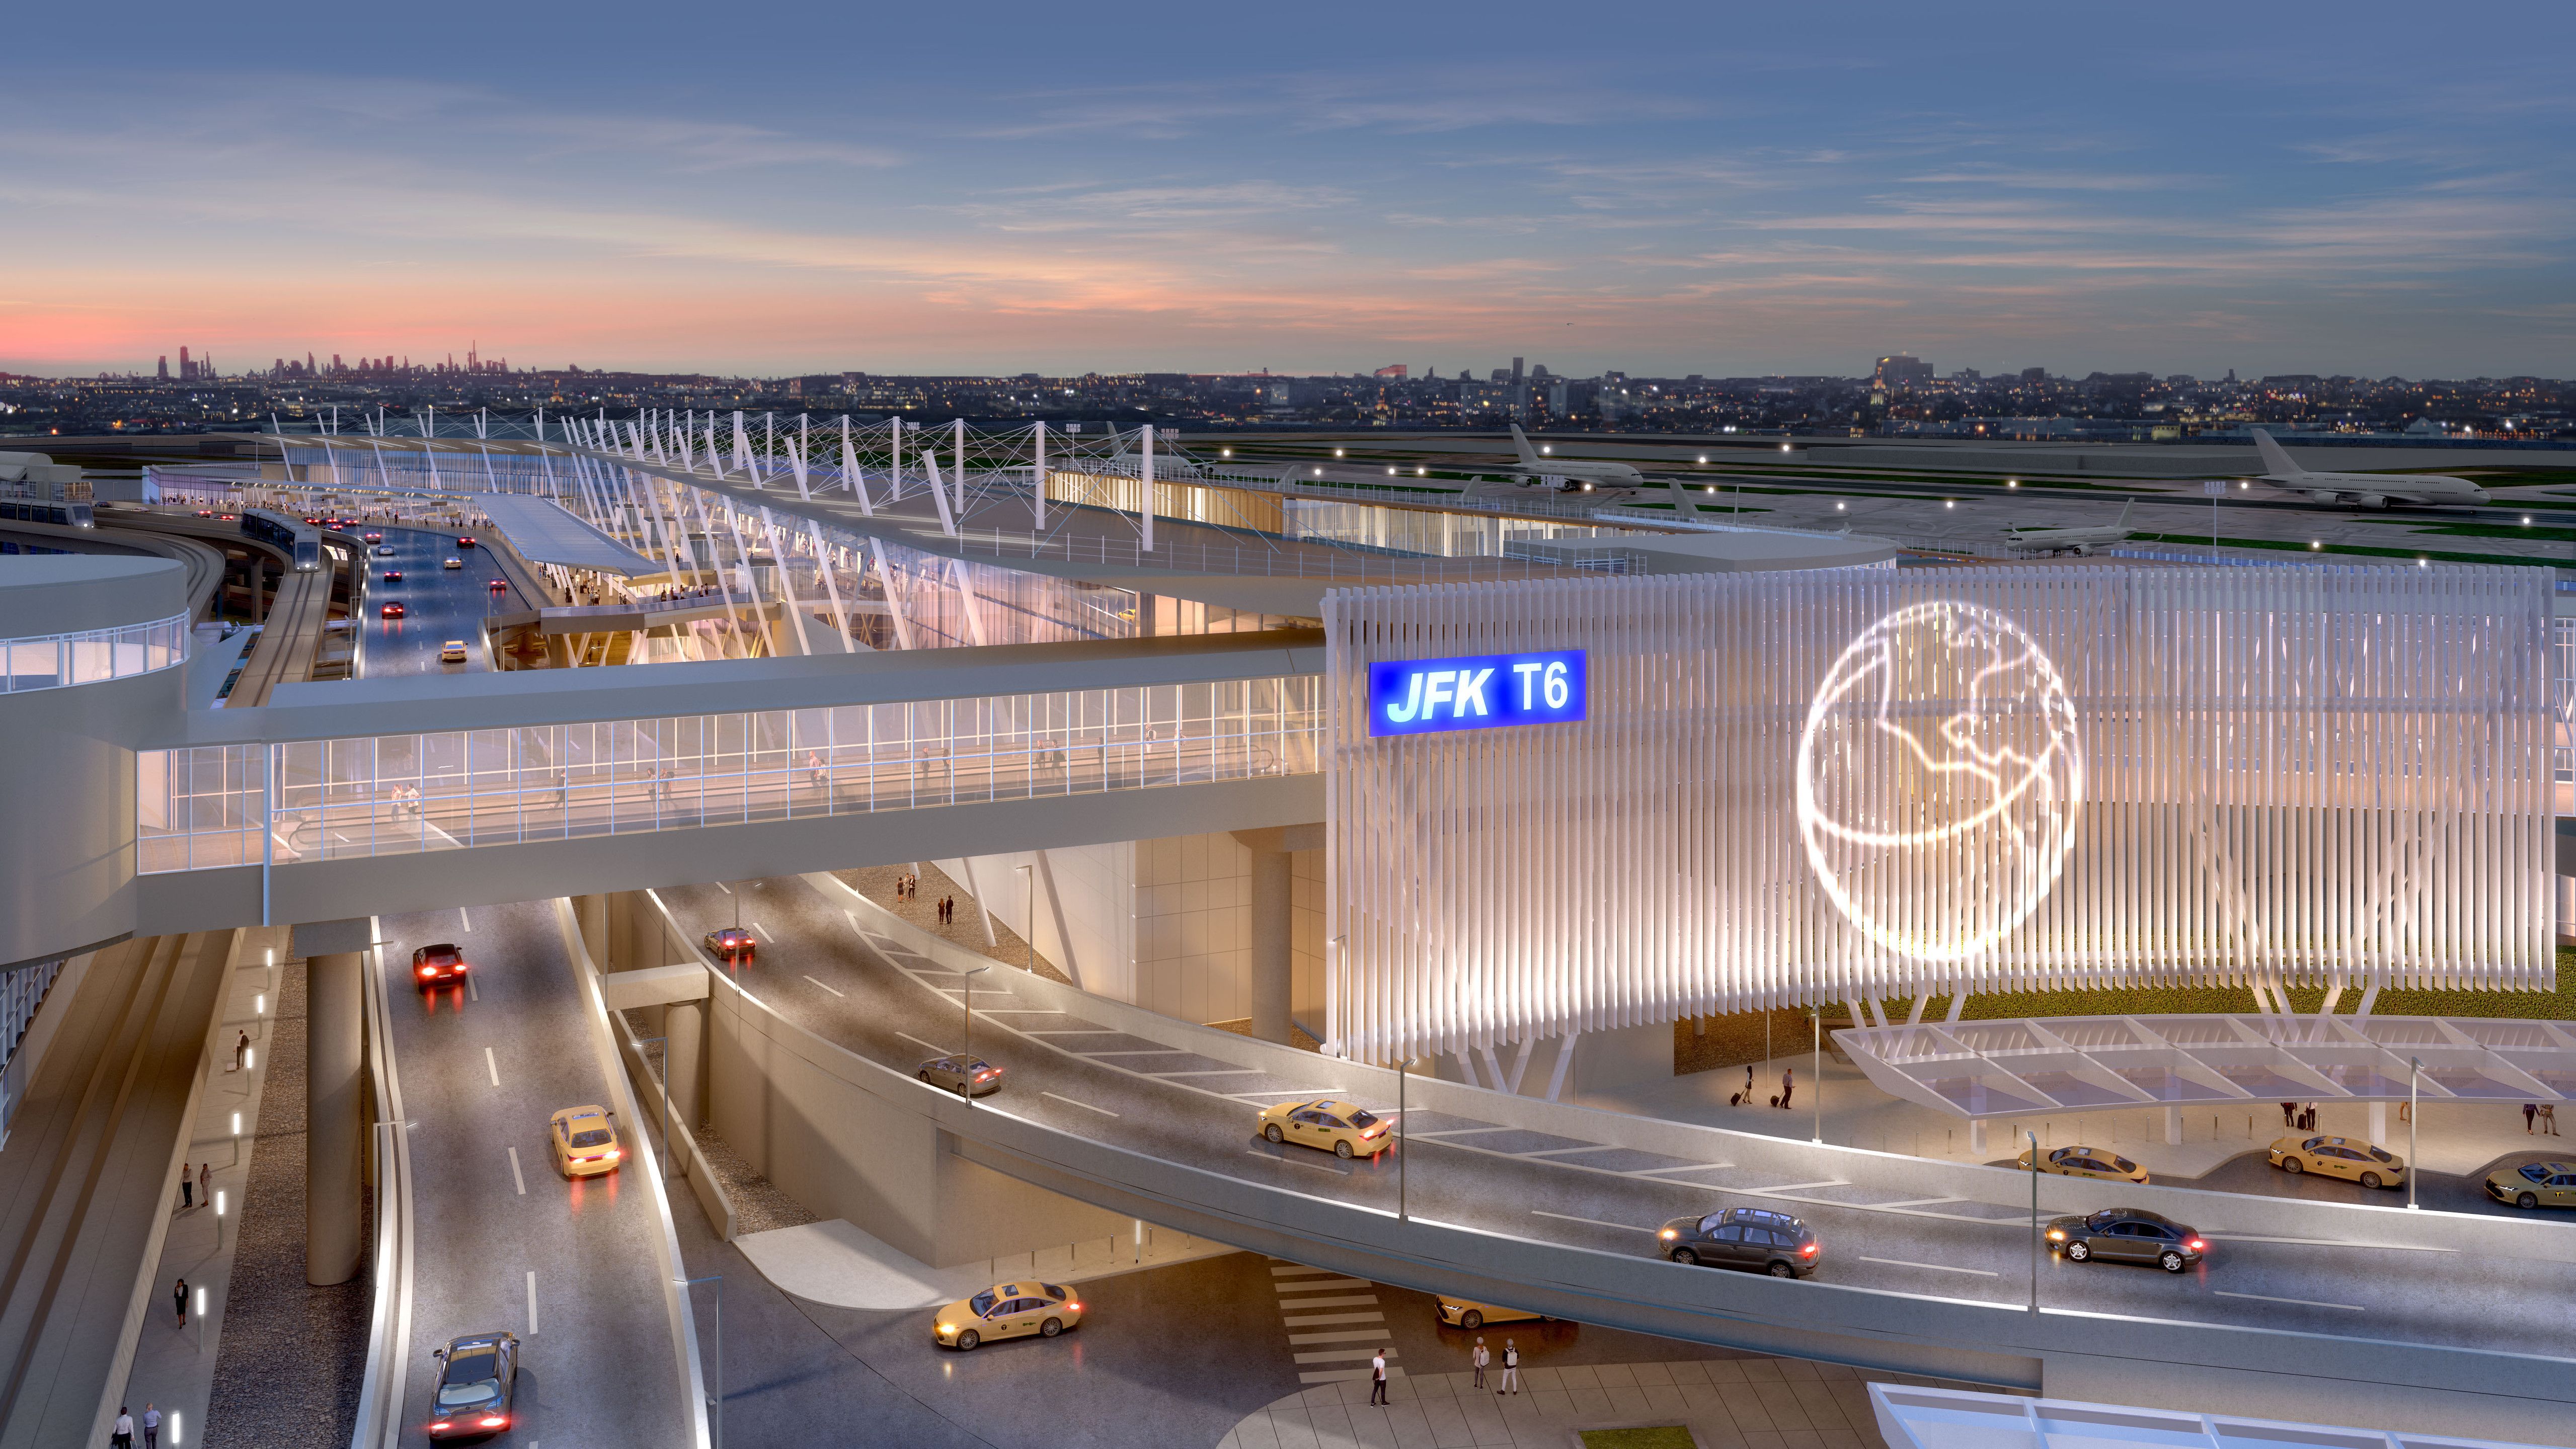 The Exterior of New York JFK's Terminal 6 building with cars driving by at sunset.